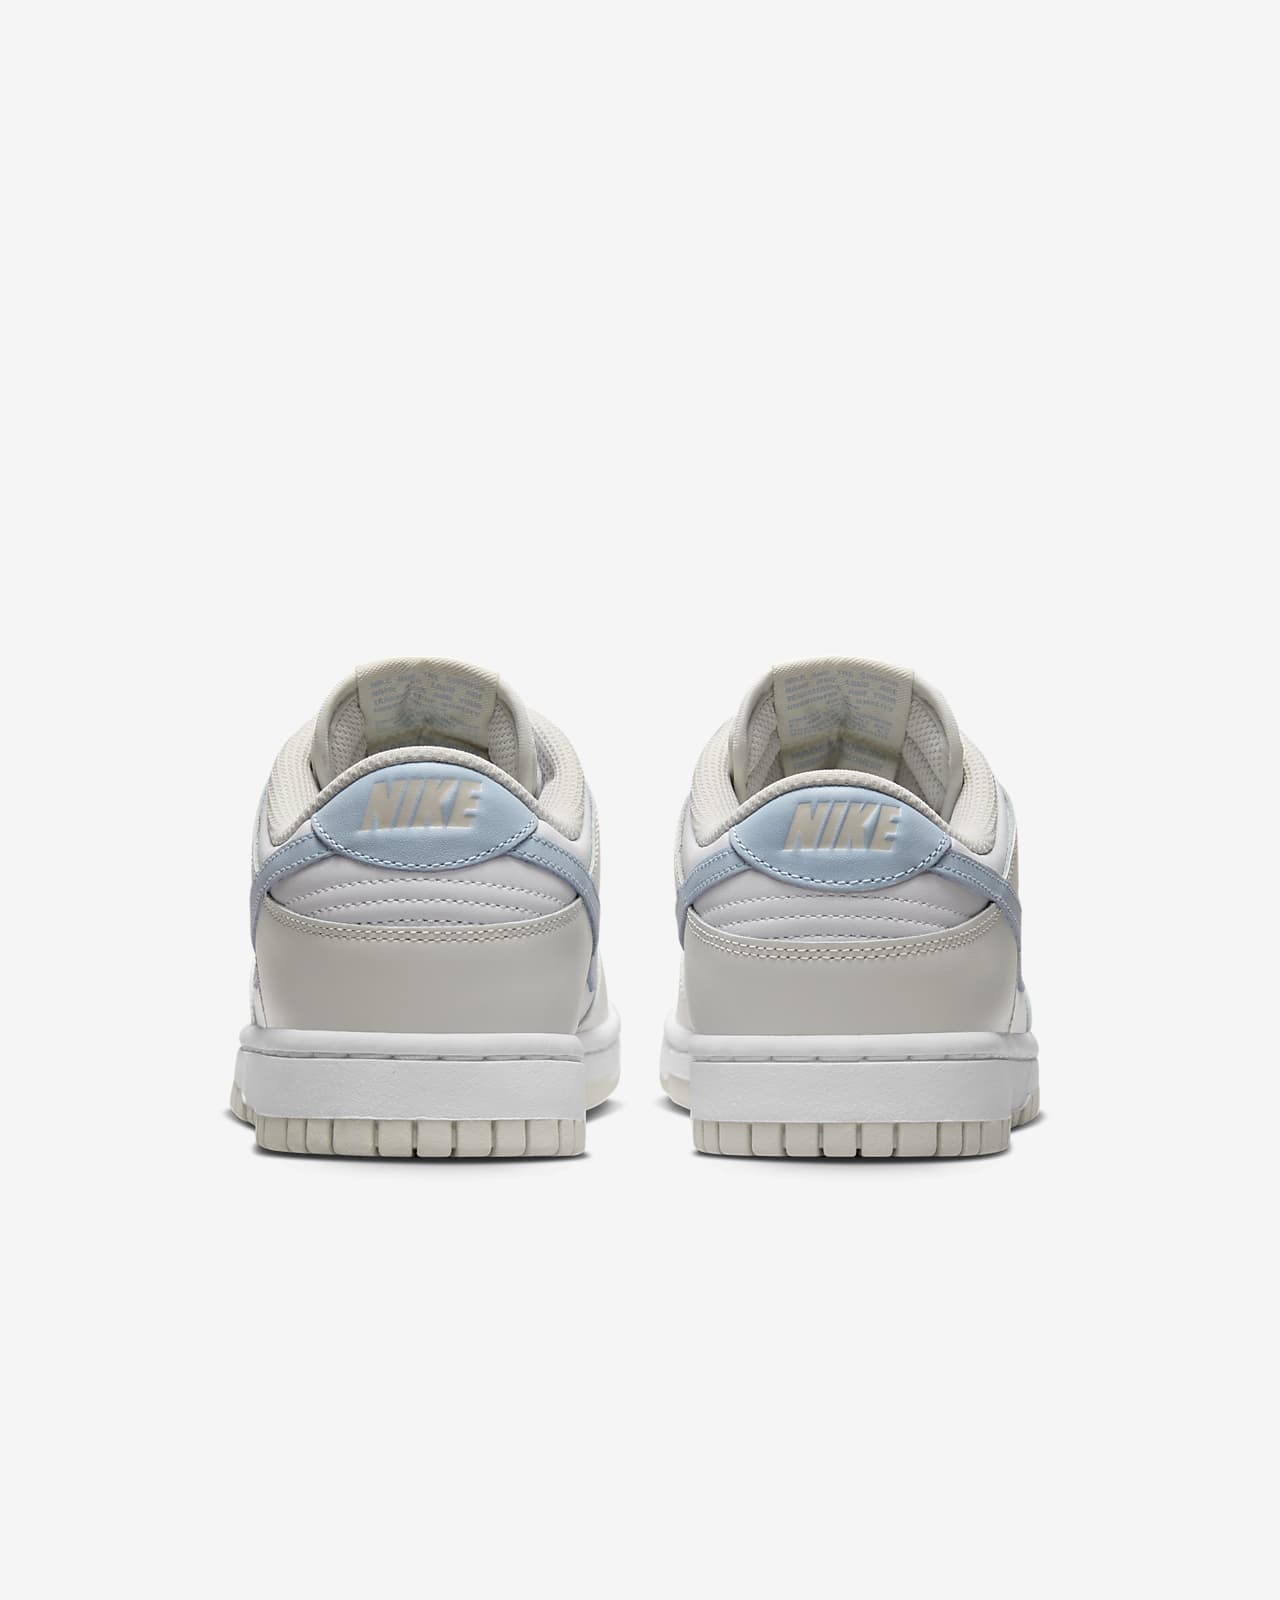 Chaussure Nike Dunk Low pour femme